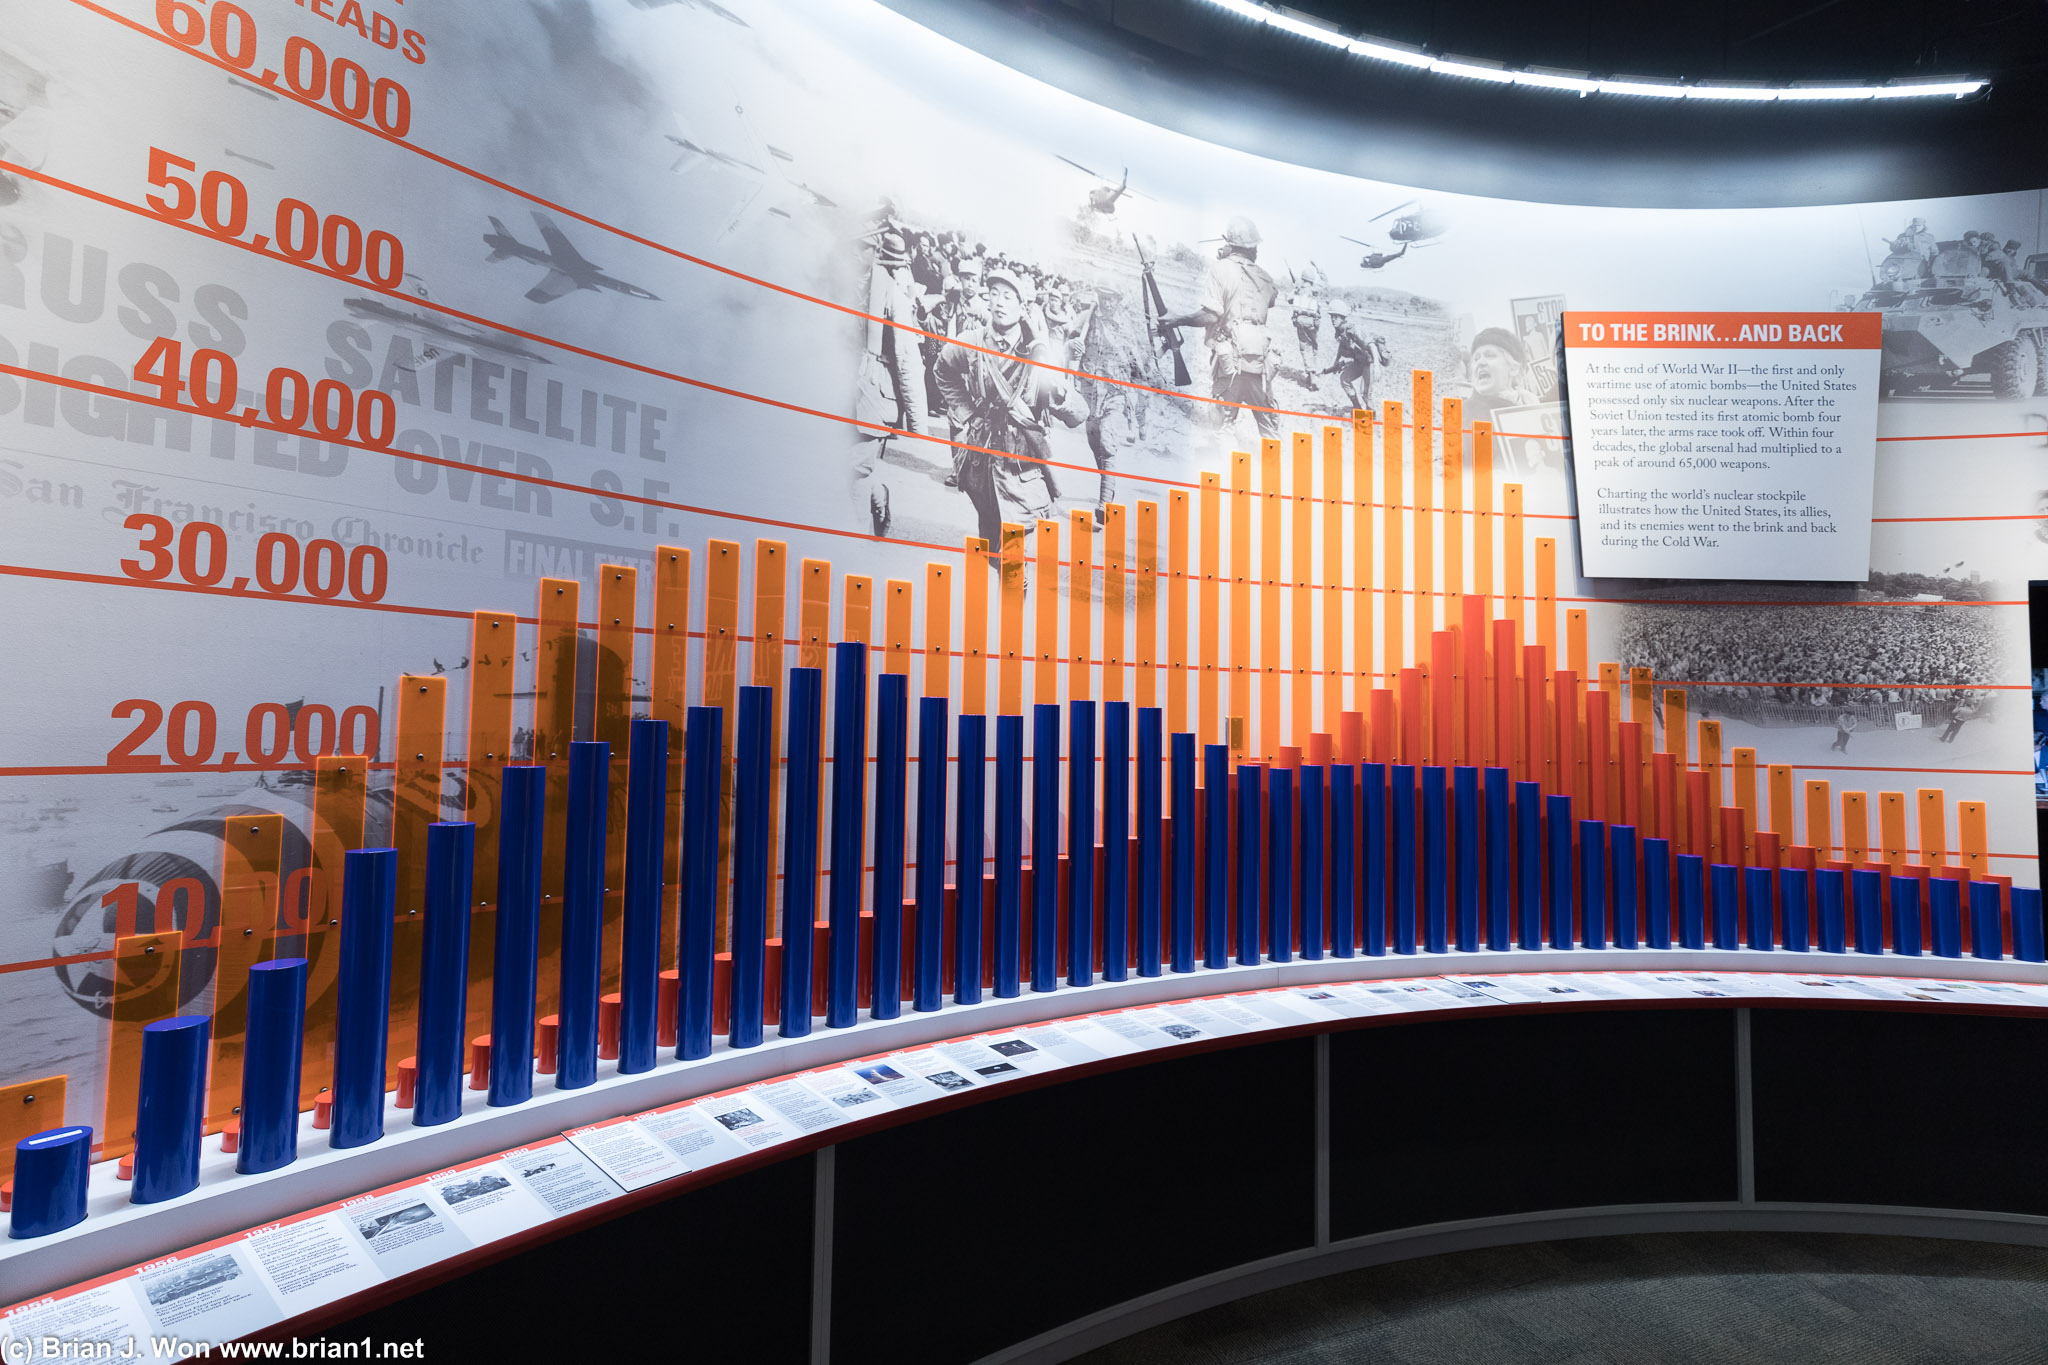 Total warhead count over time, USSR in orange, USA in blue.